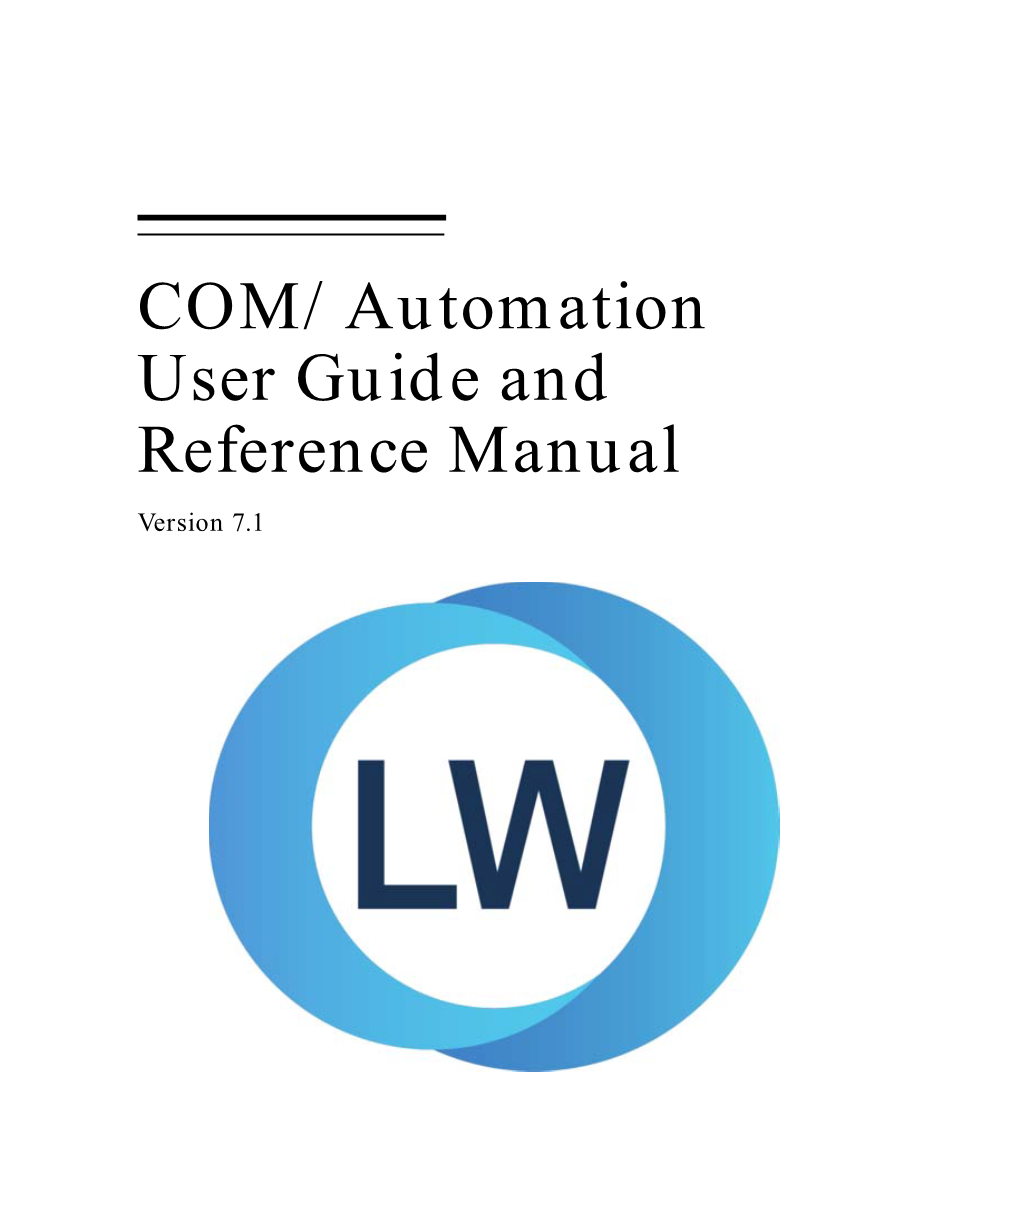 COM/Automation User Guide and Reference Manual